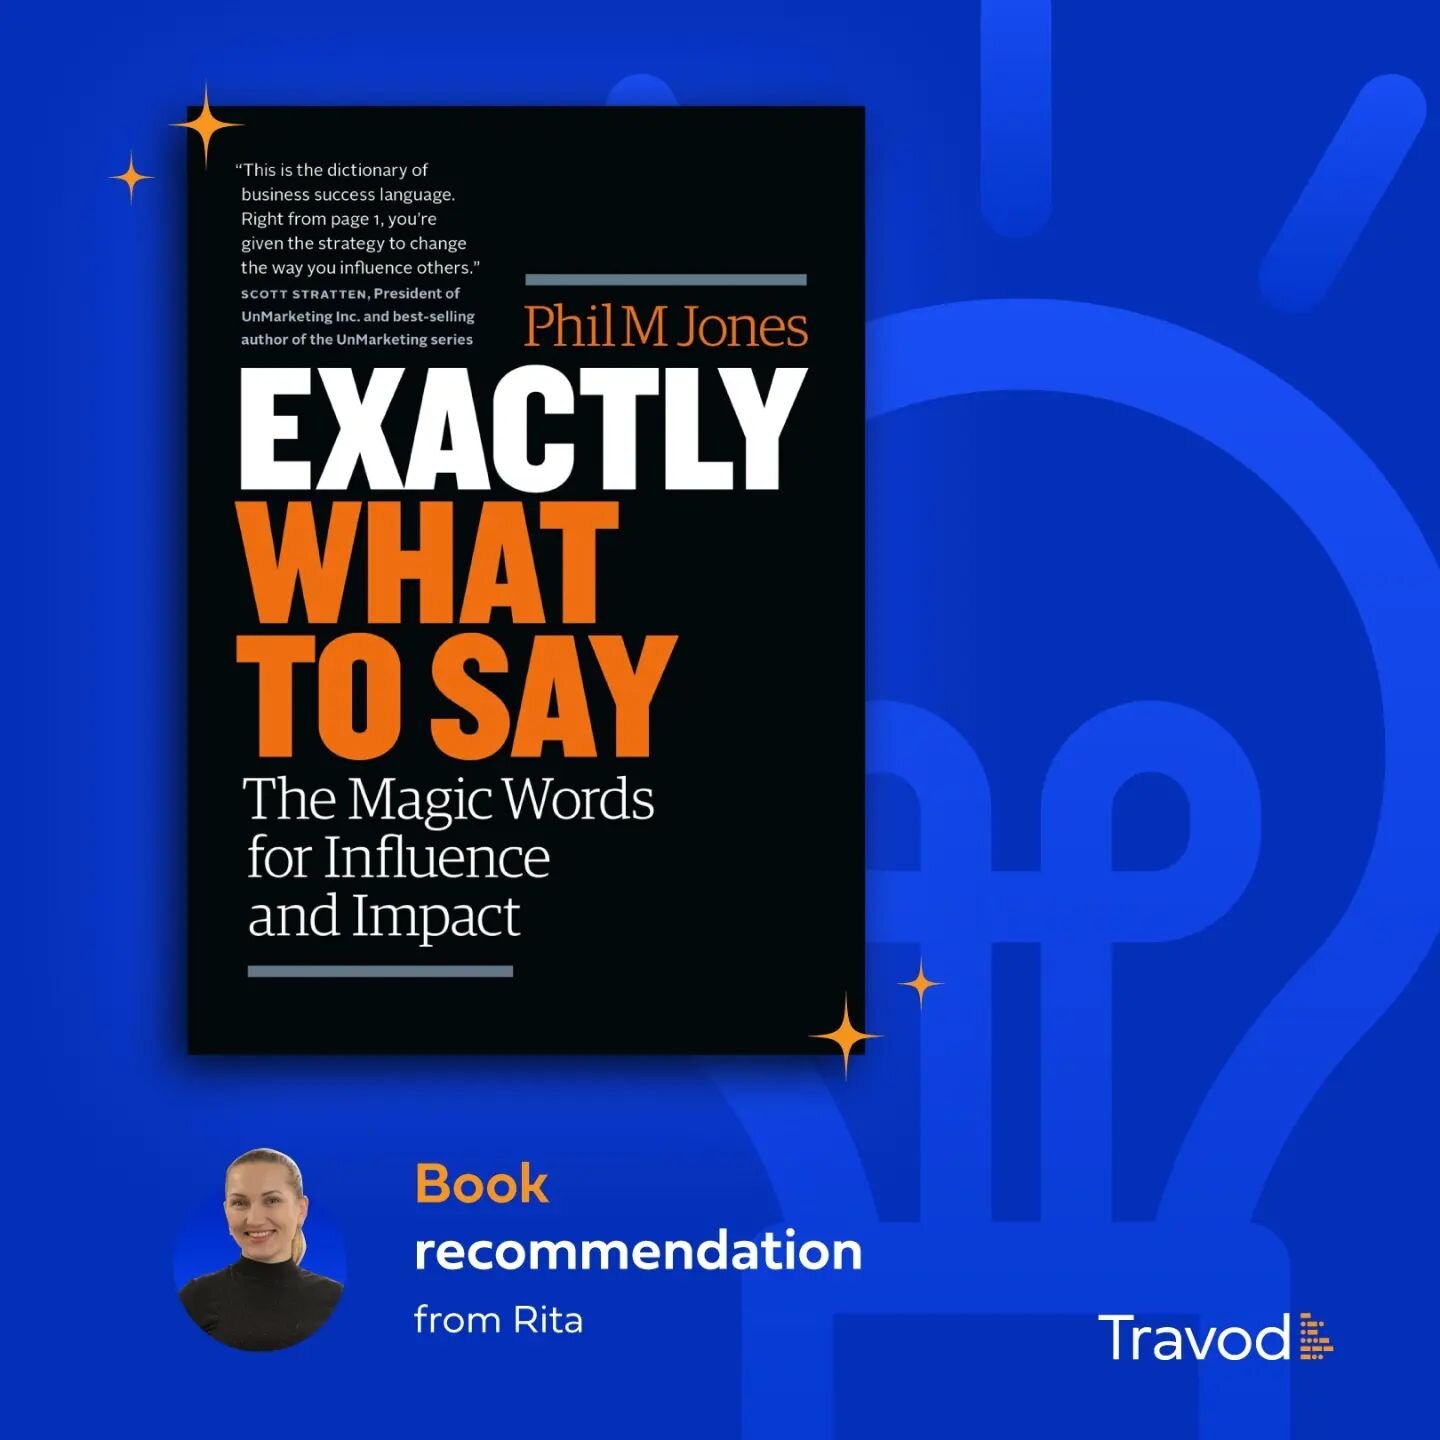 If you're looking for some practical tips to make your language more persuasive, we've got you👍


Our colleague, Rita, recommends reading &quot;Exactly What To Say&quot; by Phil M. Jones, a compelling book, which highlights powerful triggers to hel